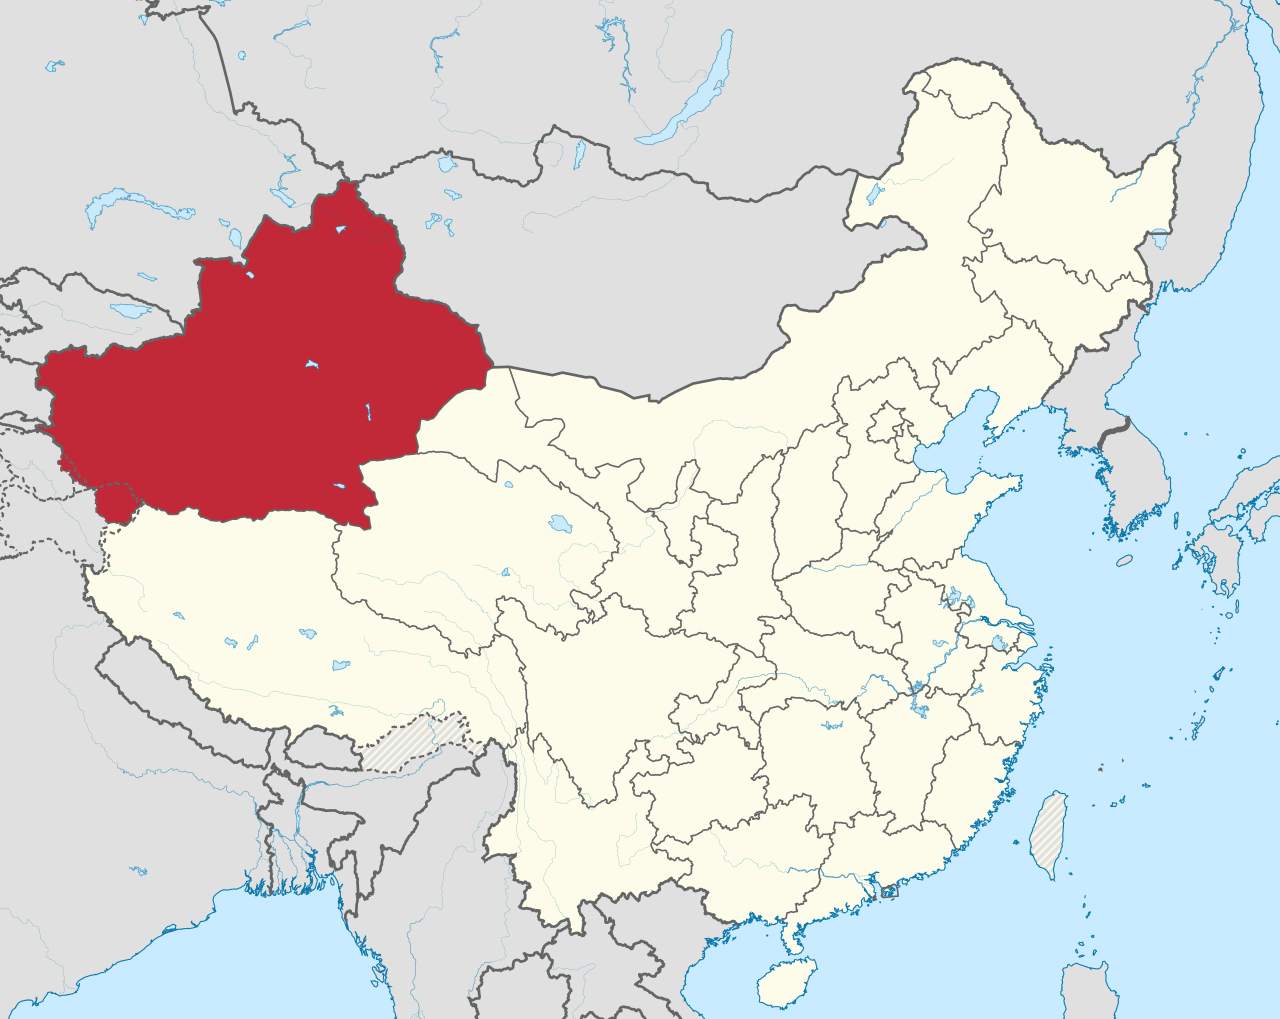 Xinjiang_in_China_(de-facto)_(+all_claims_hatched).svg.png